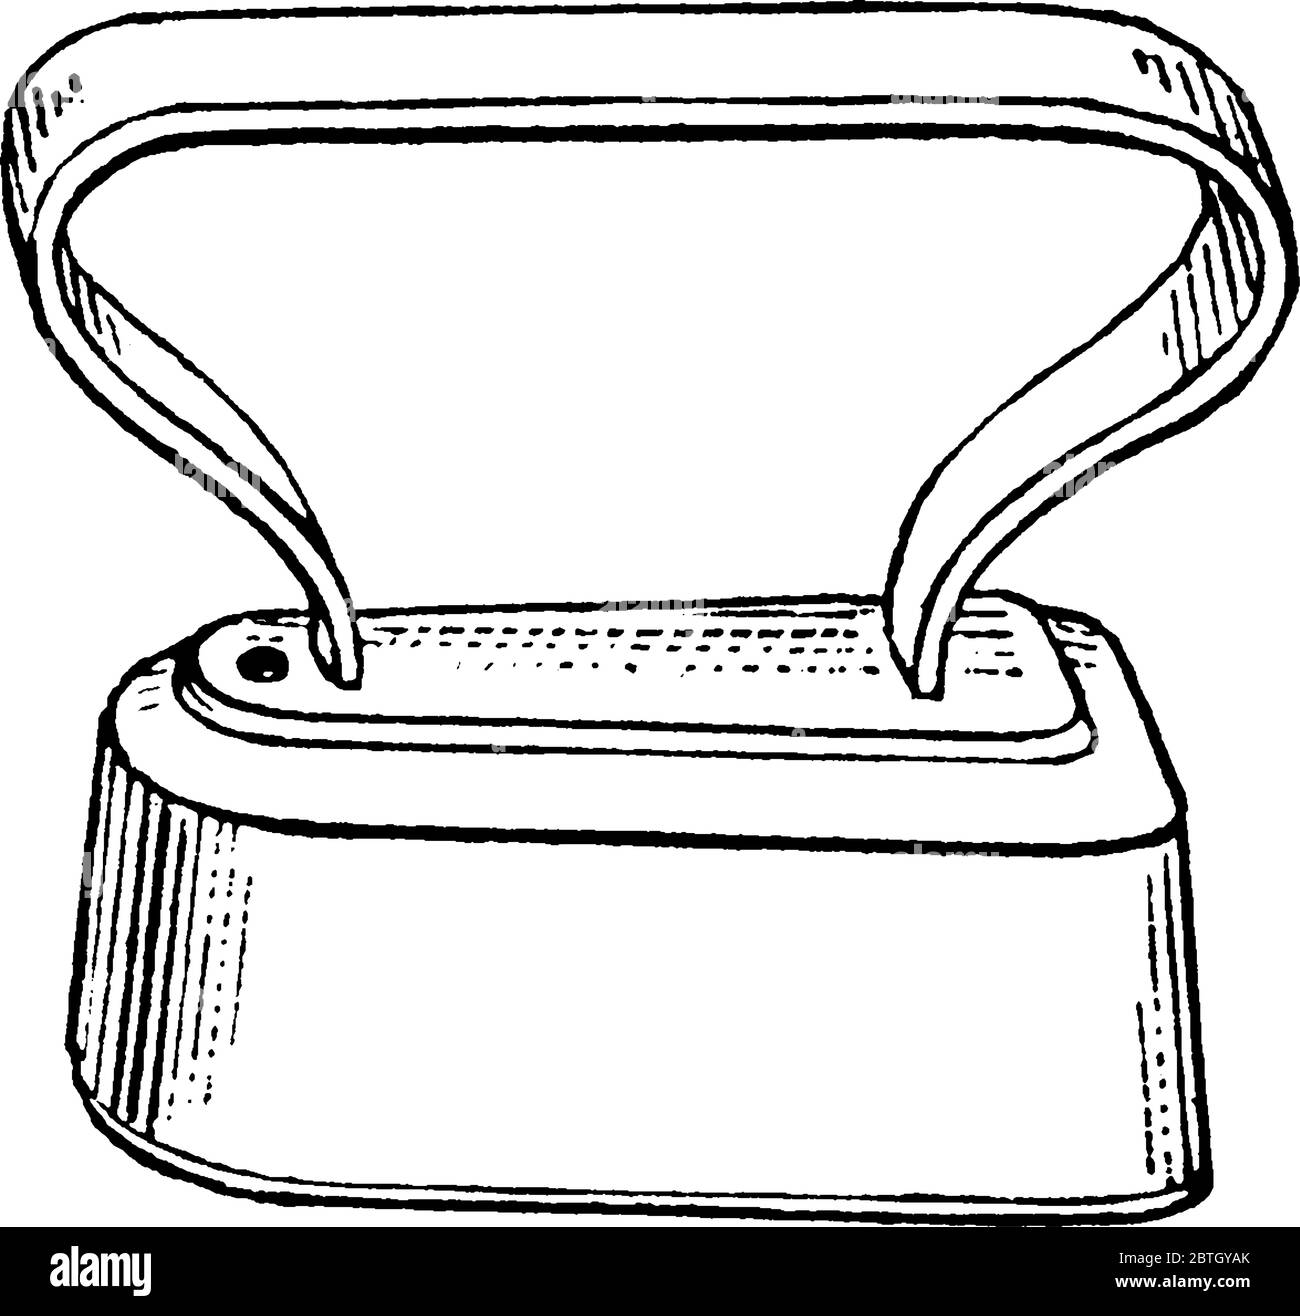 A typical representation of a laundry iron that is operated by people in hands, for polishing shirt collars, cuffs, and other starched pieces, vintage Stock Vector